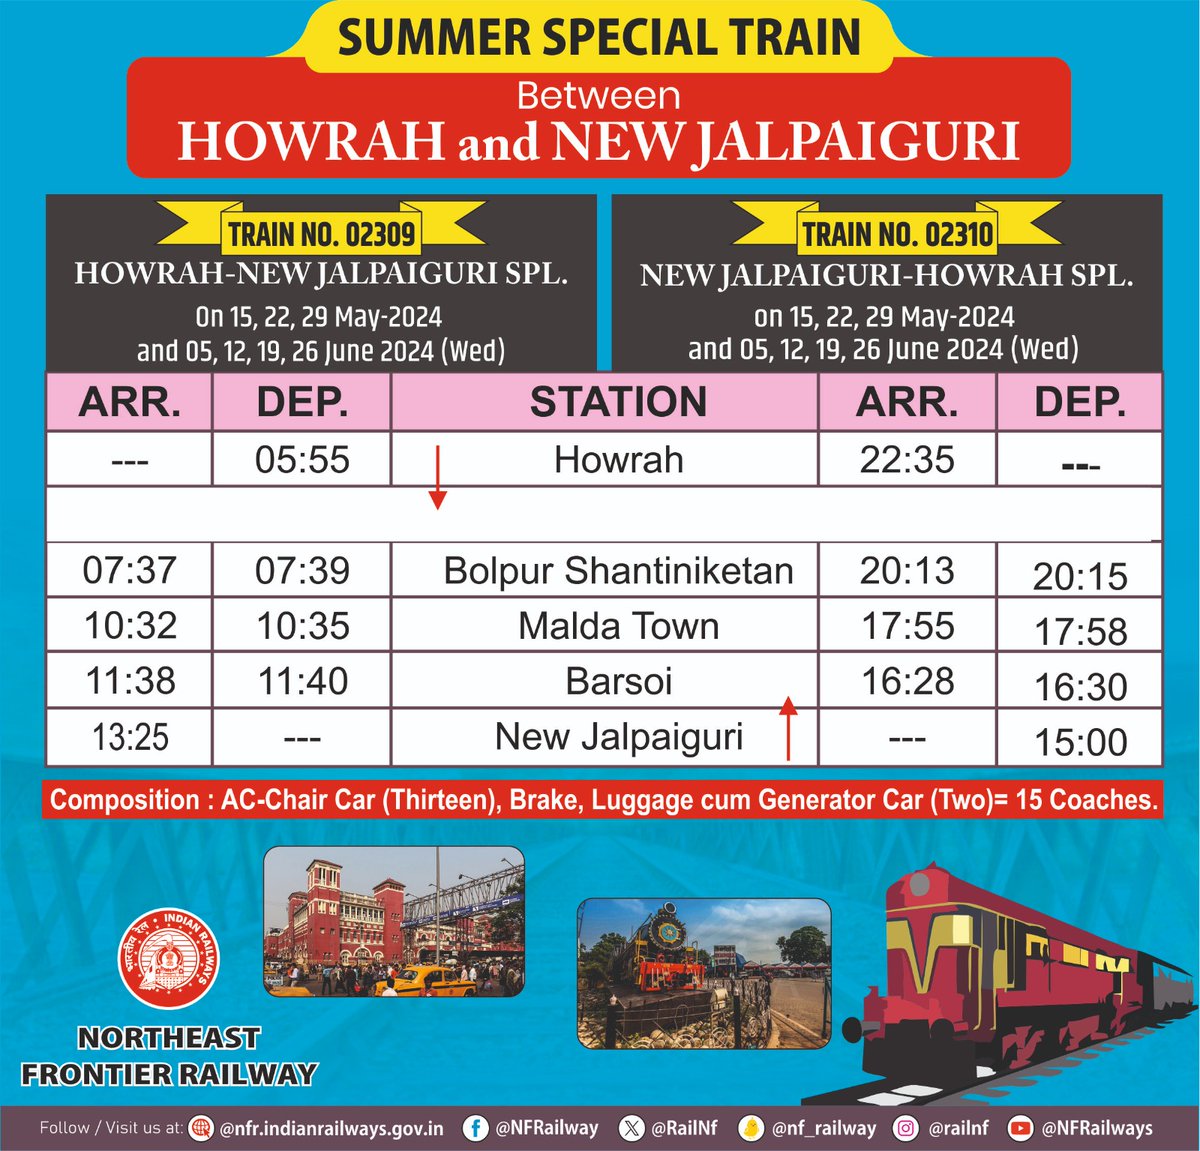 14 trips of Superfast Summer special train between New Jalpaiguri and Howrah for the benefit of passengers as per details given below: